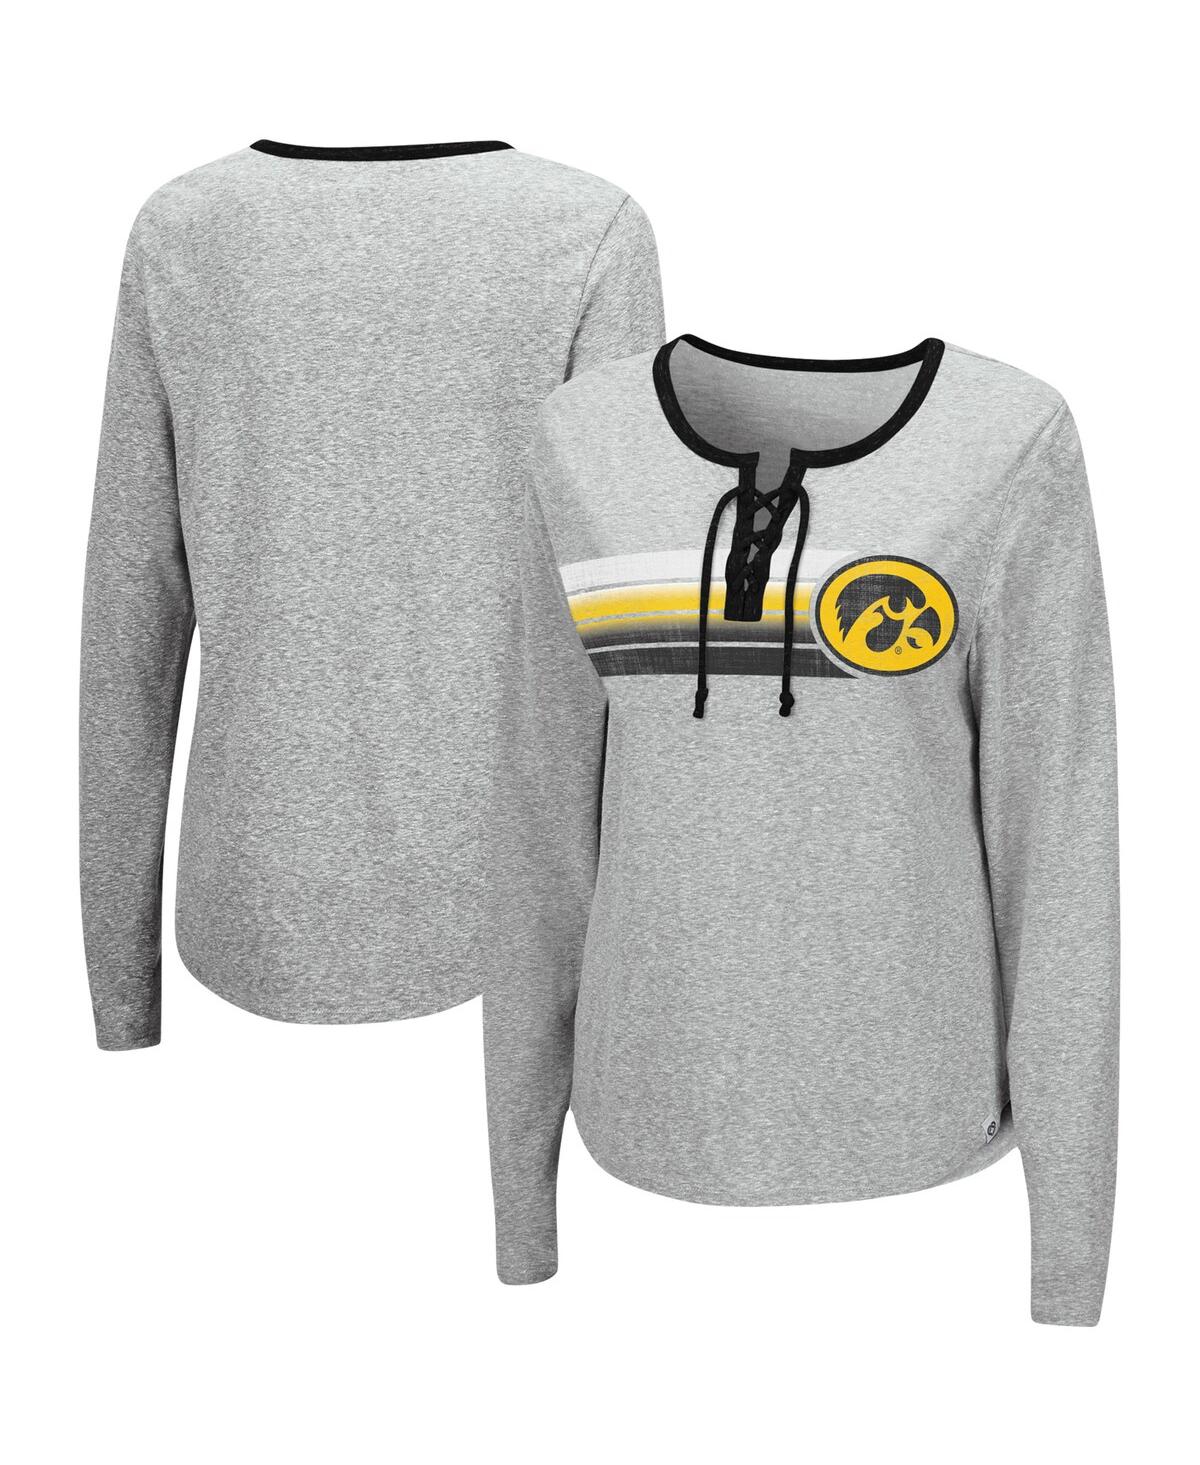 Women's Colosseum Heathered Gray Iowa Hawkeyes Sundial Tri-Blend Long Sleeve Lace-Up T-shirt - Heathered Gray